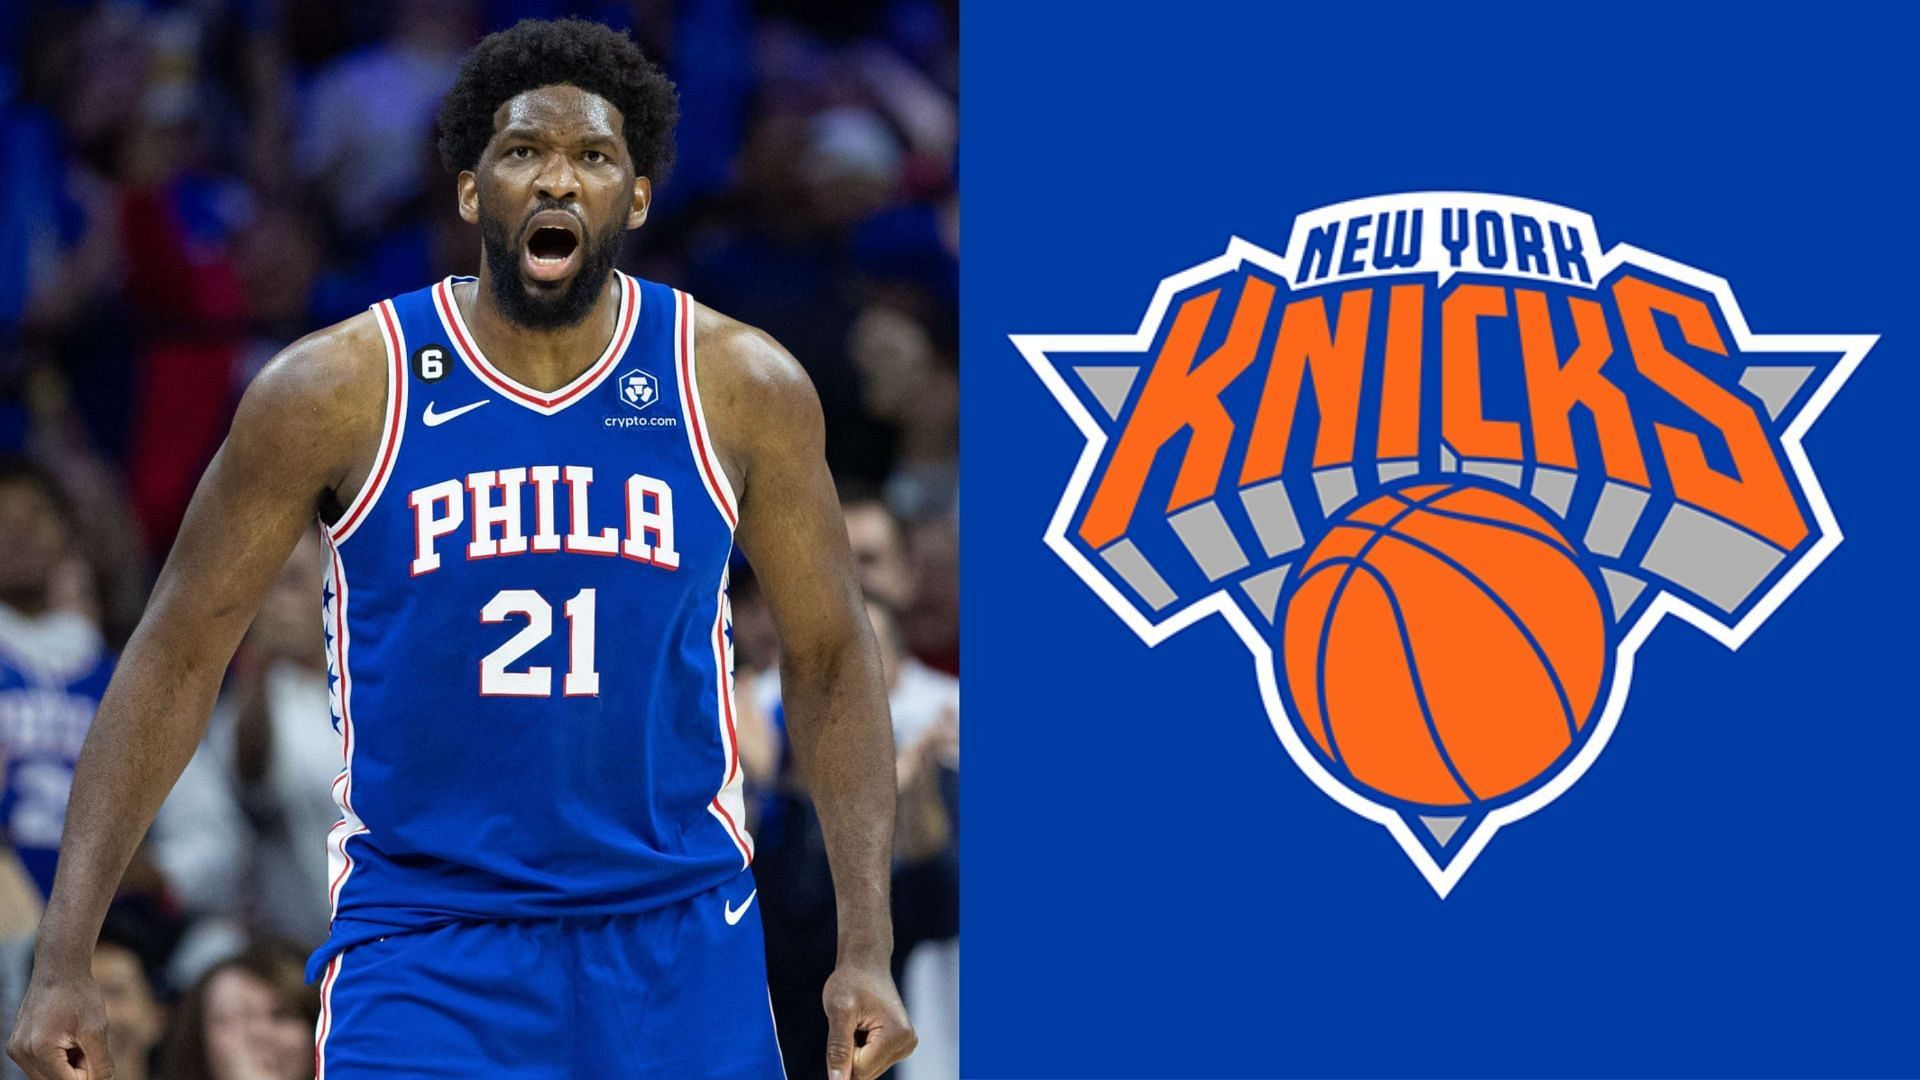 According to Chris Broussard on First Things First, there are rumors that Joel Embiid wants to join the New York Knicks